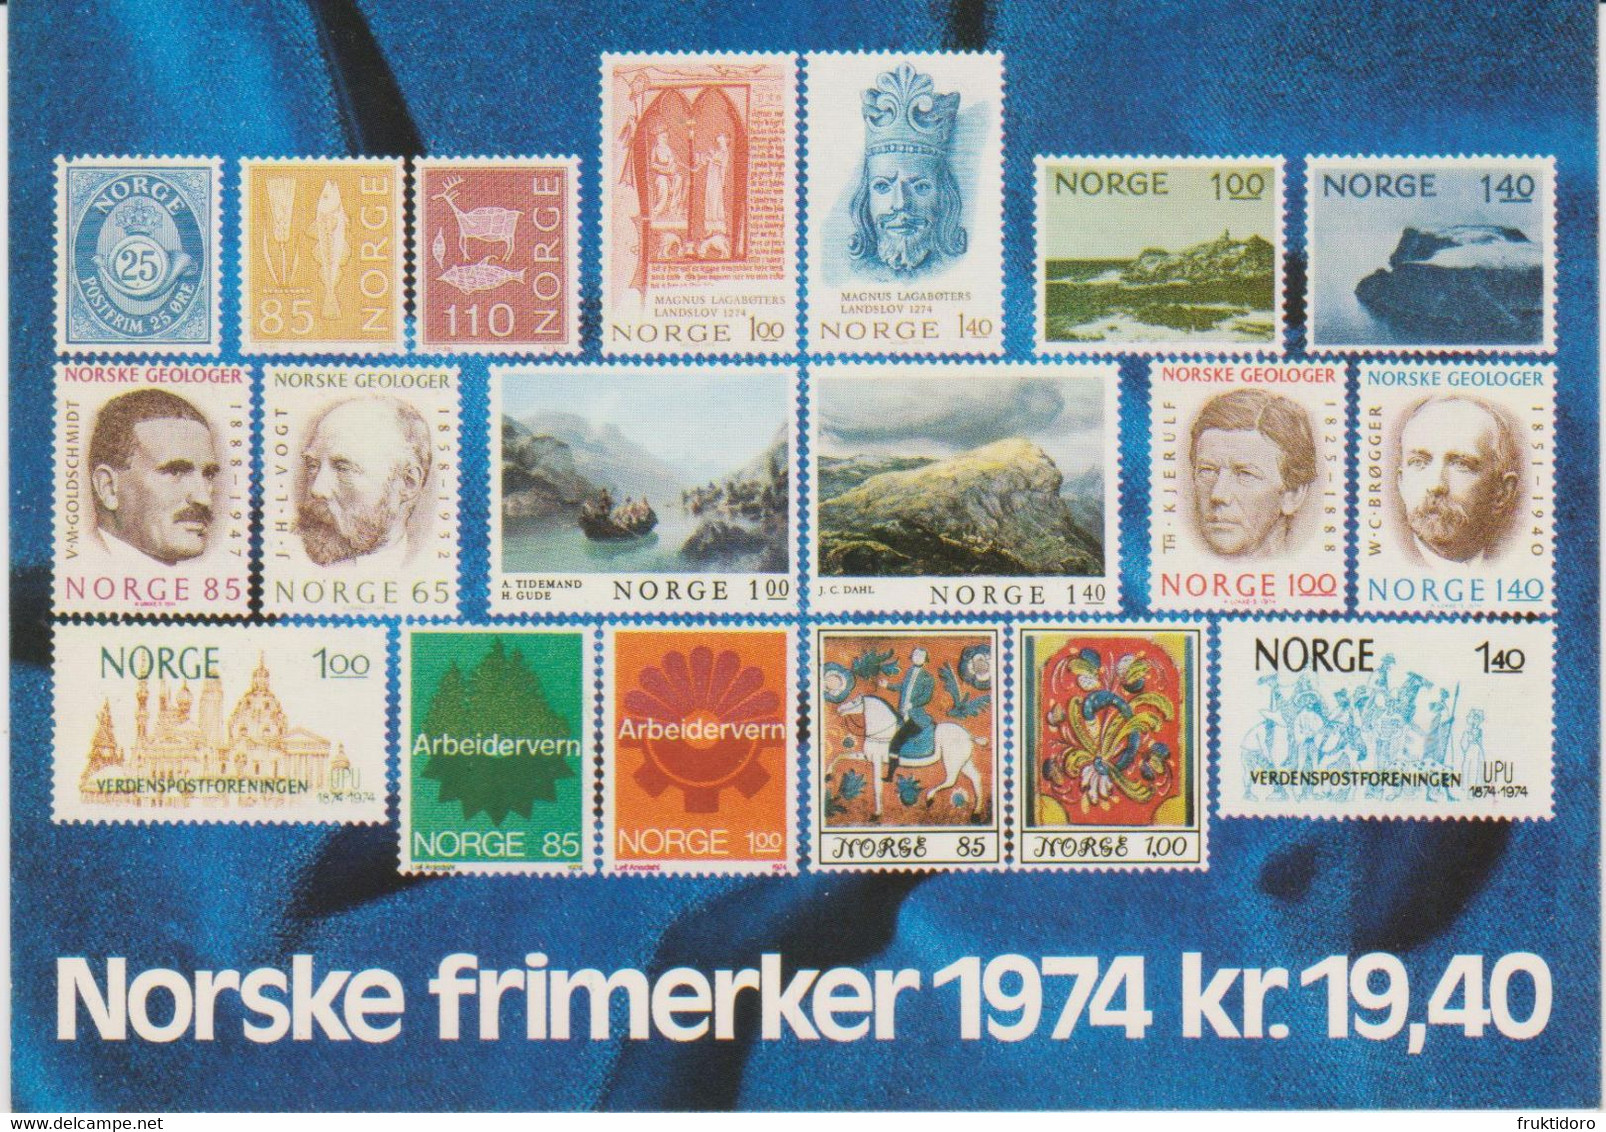 Norway Year Set Norwegian Stamps 1974 - Posthorn - North Cape - Magnus Lagabøte's State Law - Industrial Safety ** - Full Years